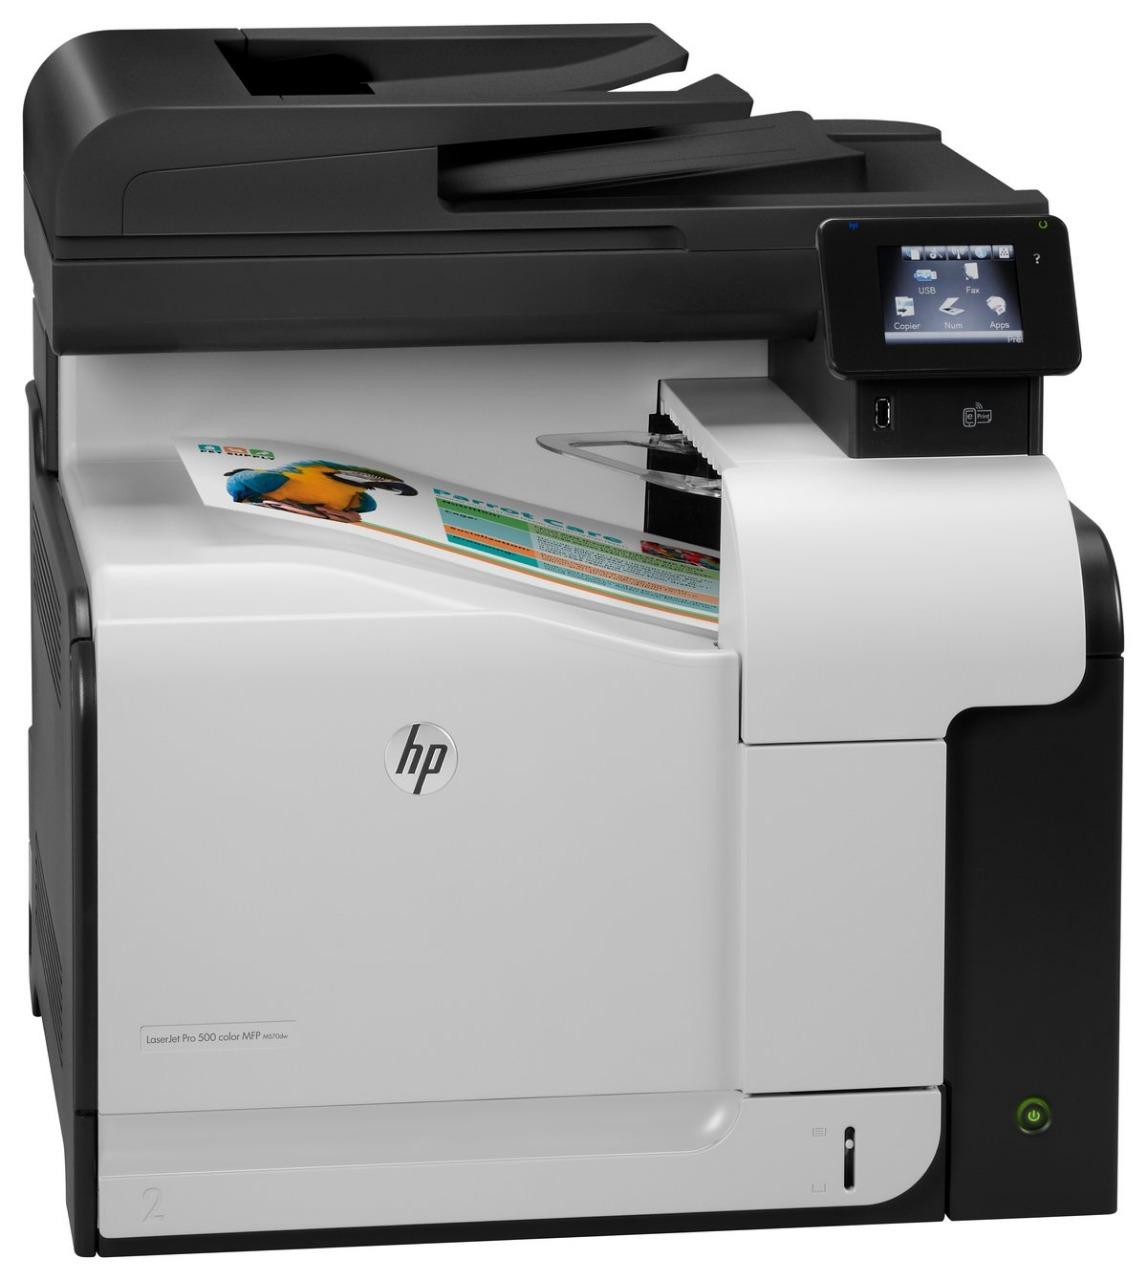 which mac driver file for hp laserjet pro m452dn